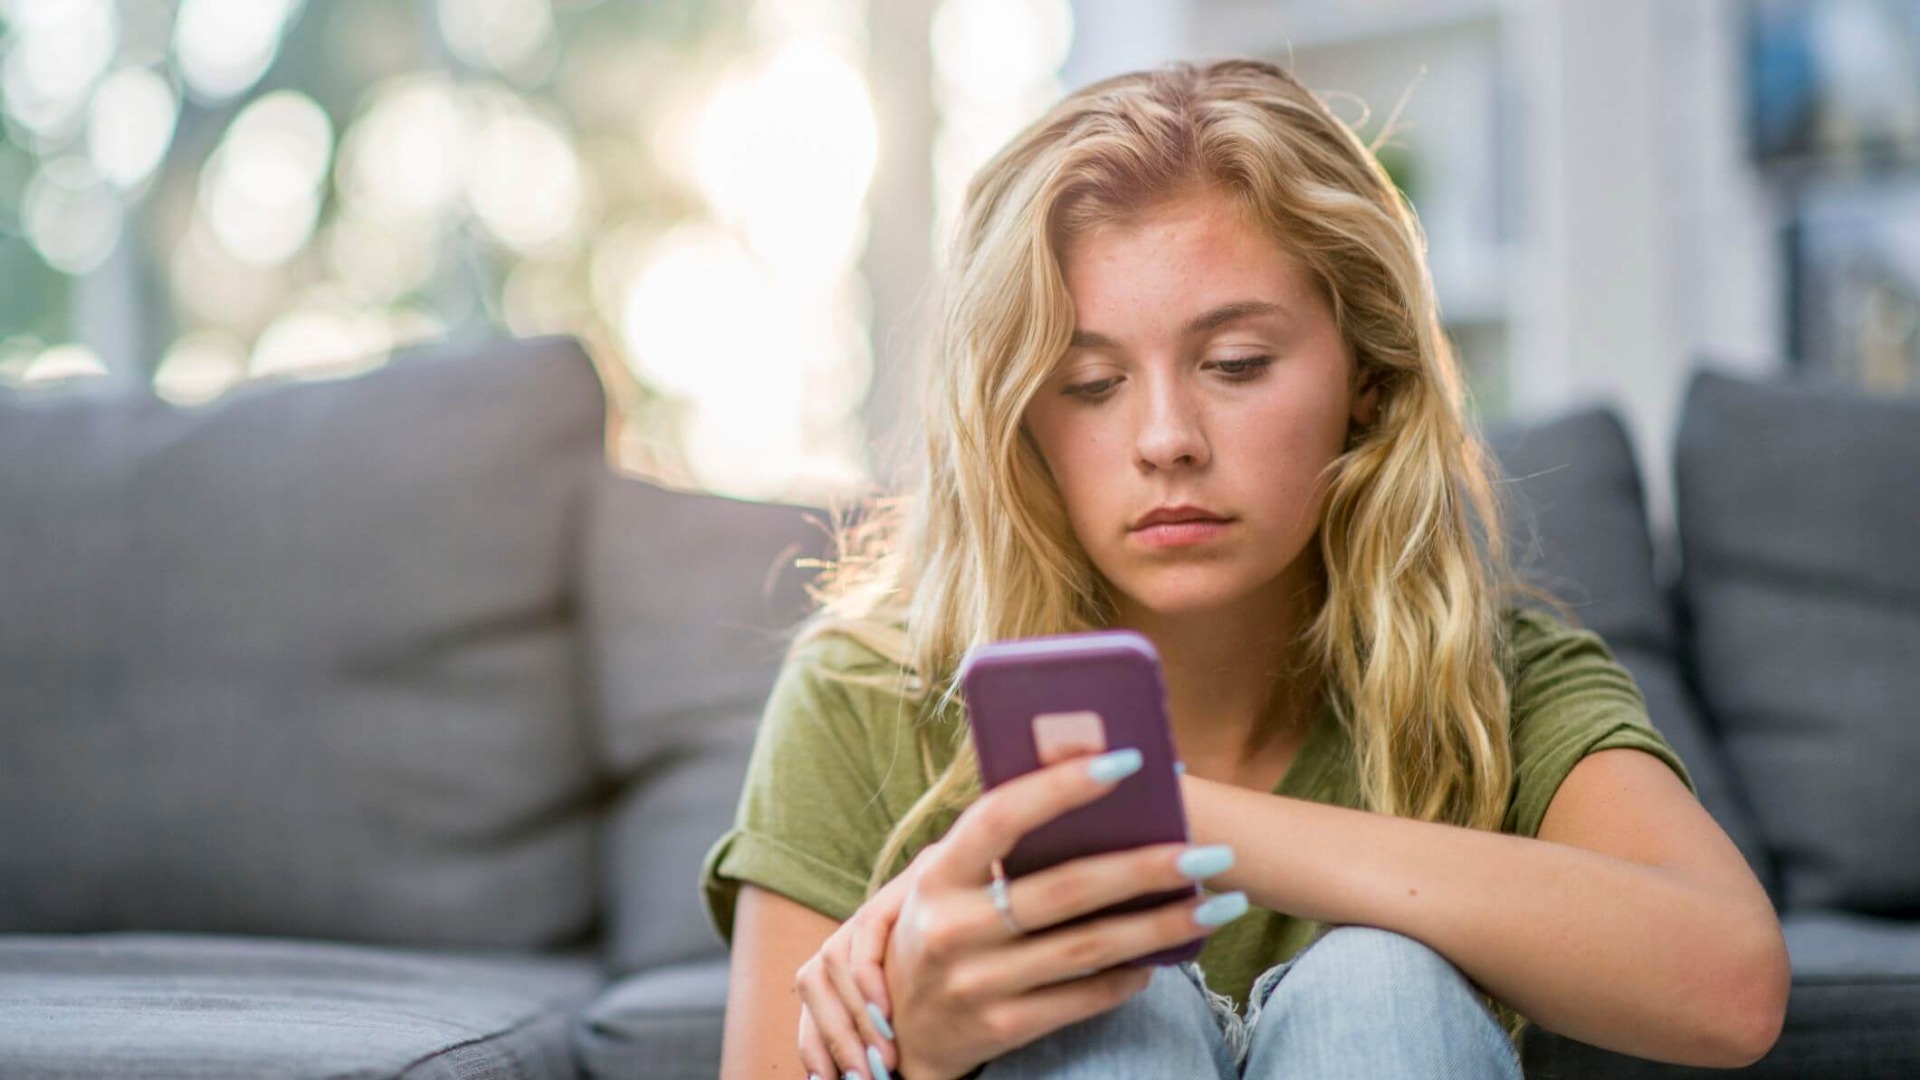 Women and Children are Primary Cyberbullying Victims